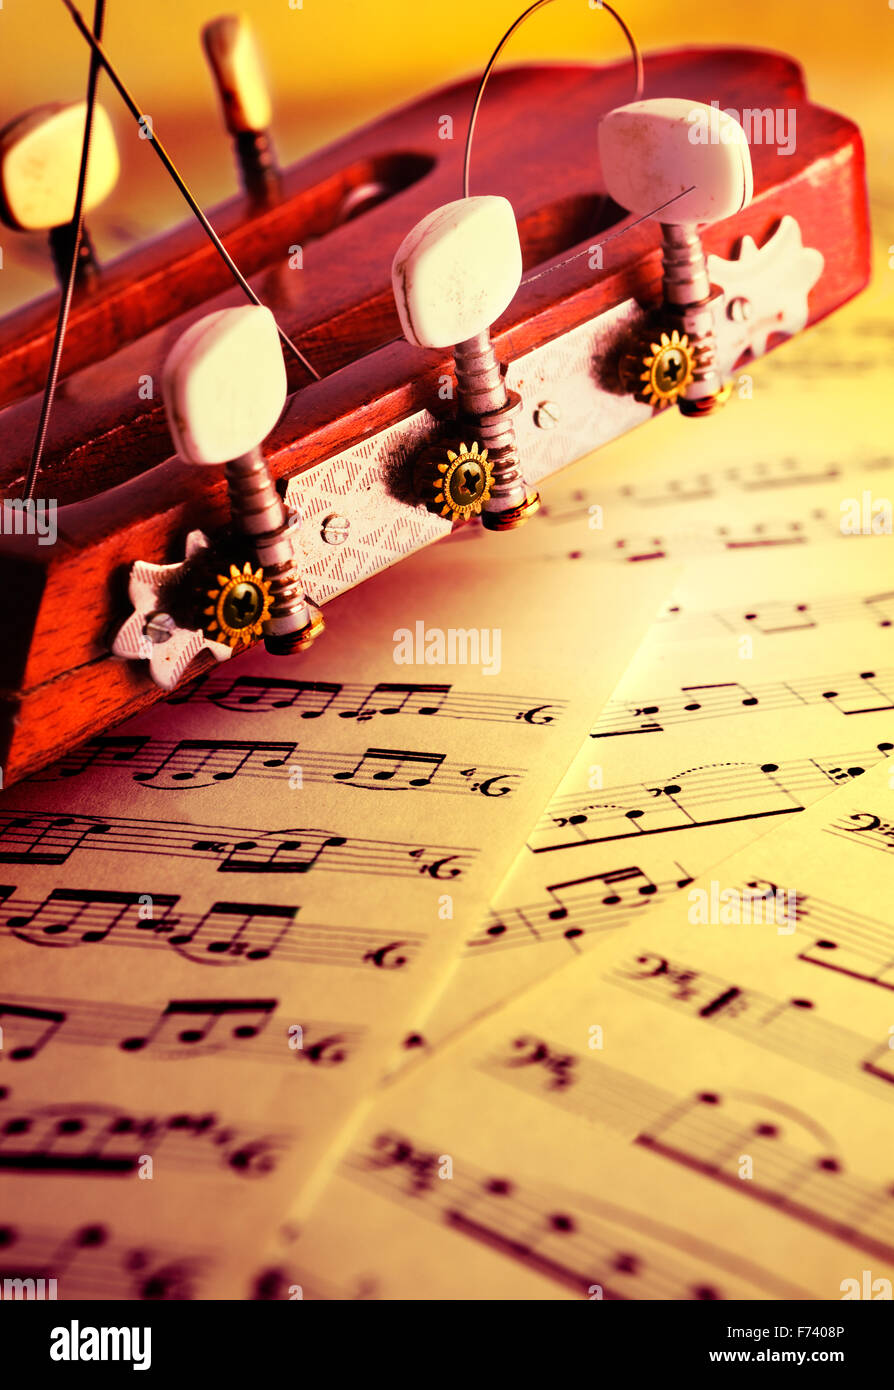 Classical musical background with acoustic guitar and music score Stock Photo